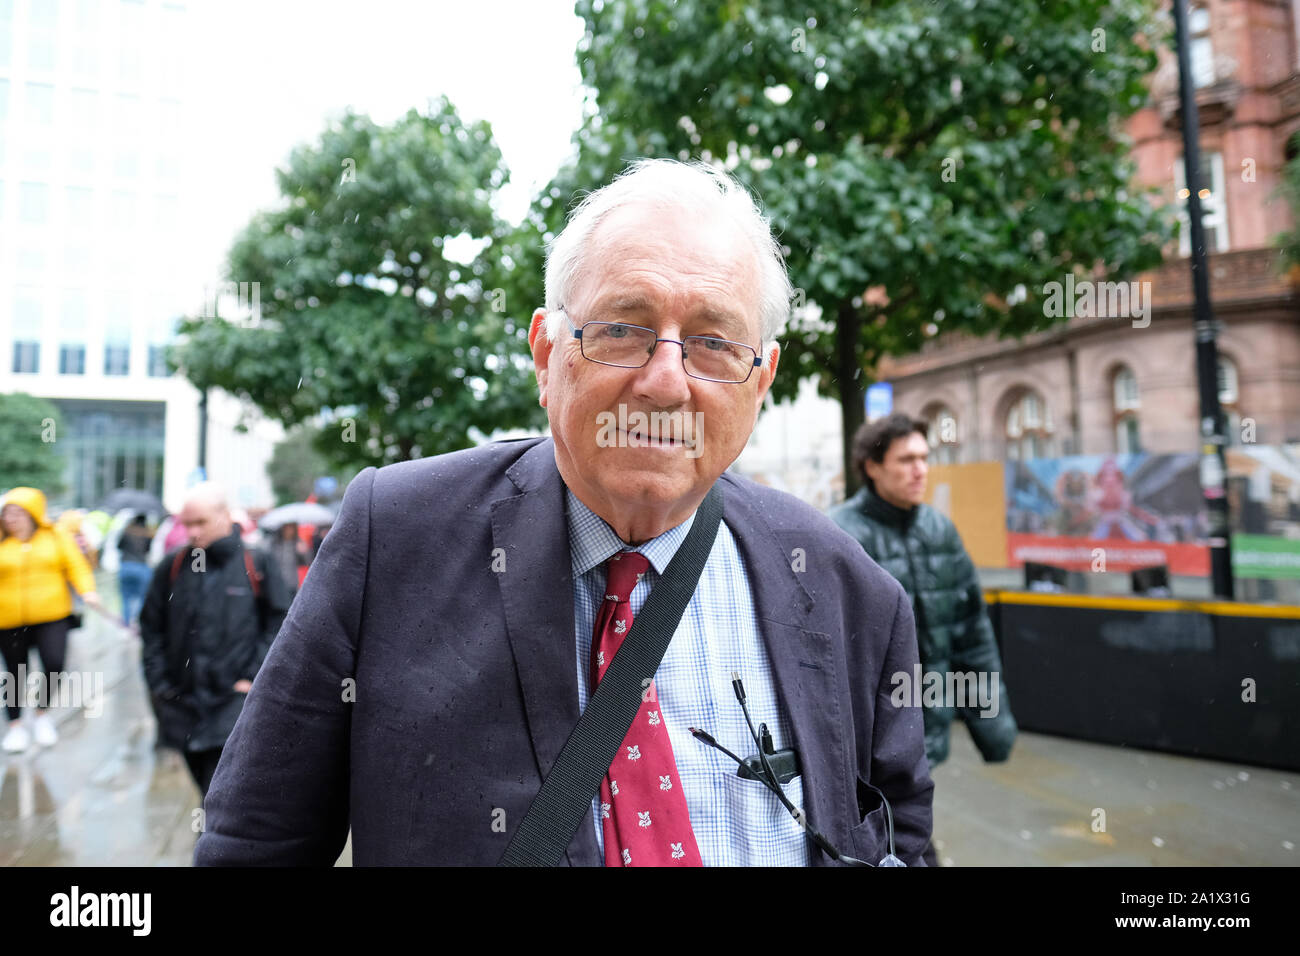 Manchester, UK – Sunday 29th September 2019.  Veteran Conservative MP Sir Peter Bottomley arrives at the Conservative Party Conference on the opening day of the Tory event.  Photo Steven May / Alamy Live News Stock Photo